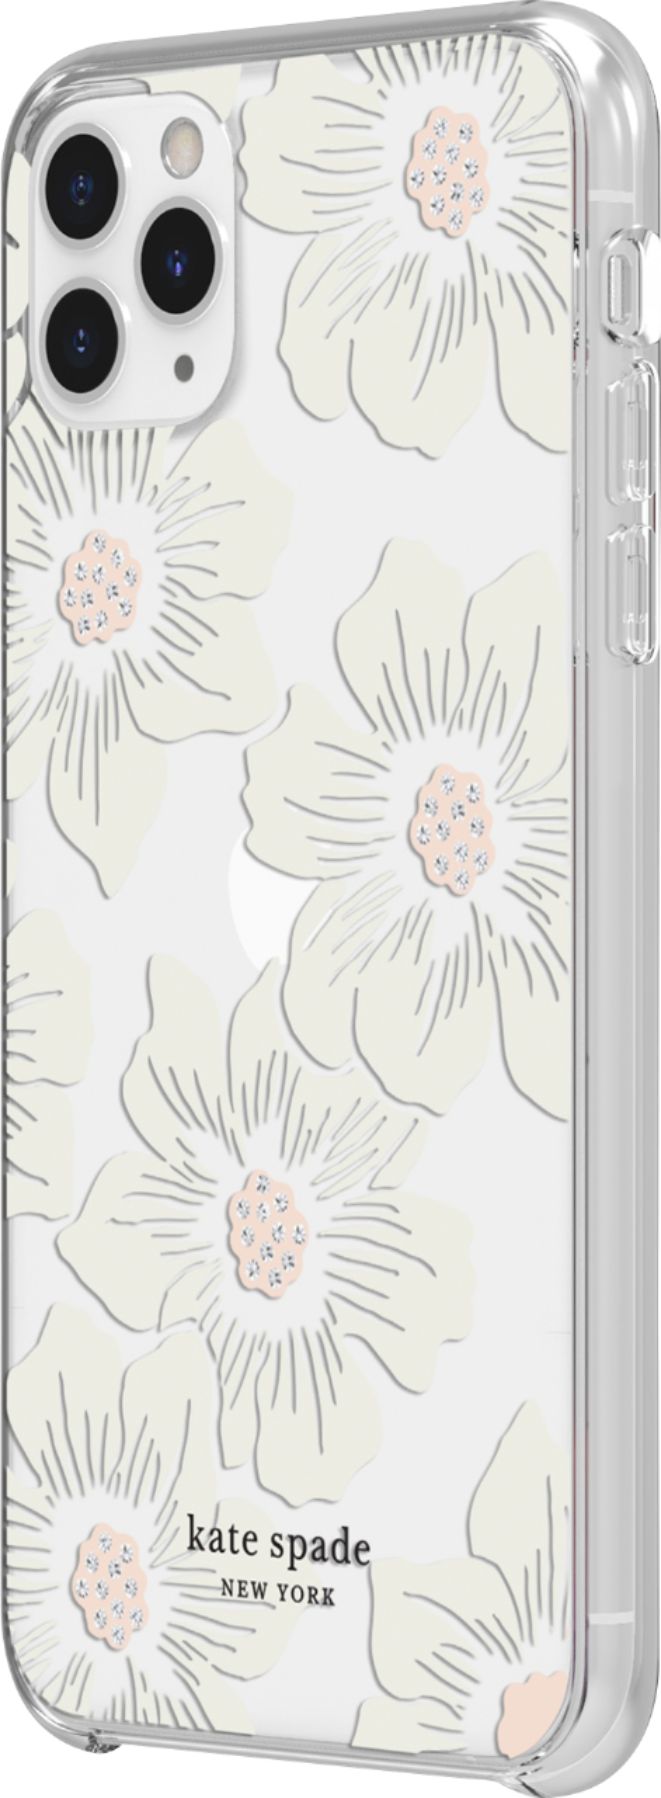 kate spade new york Protective Hard Shell Case for Apple® iPhone® 11 Pro  Max Cream With Stones/Hollyhock Floral Clear KSIPH-132-HHCCS - Best Buy